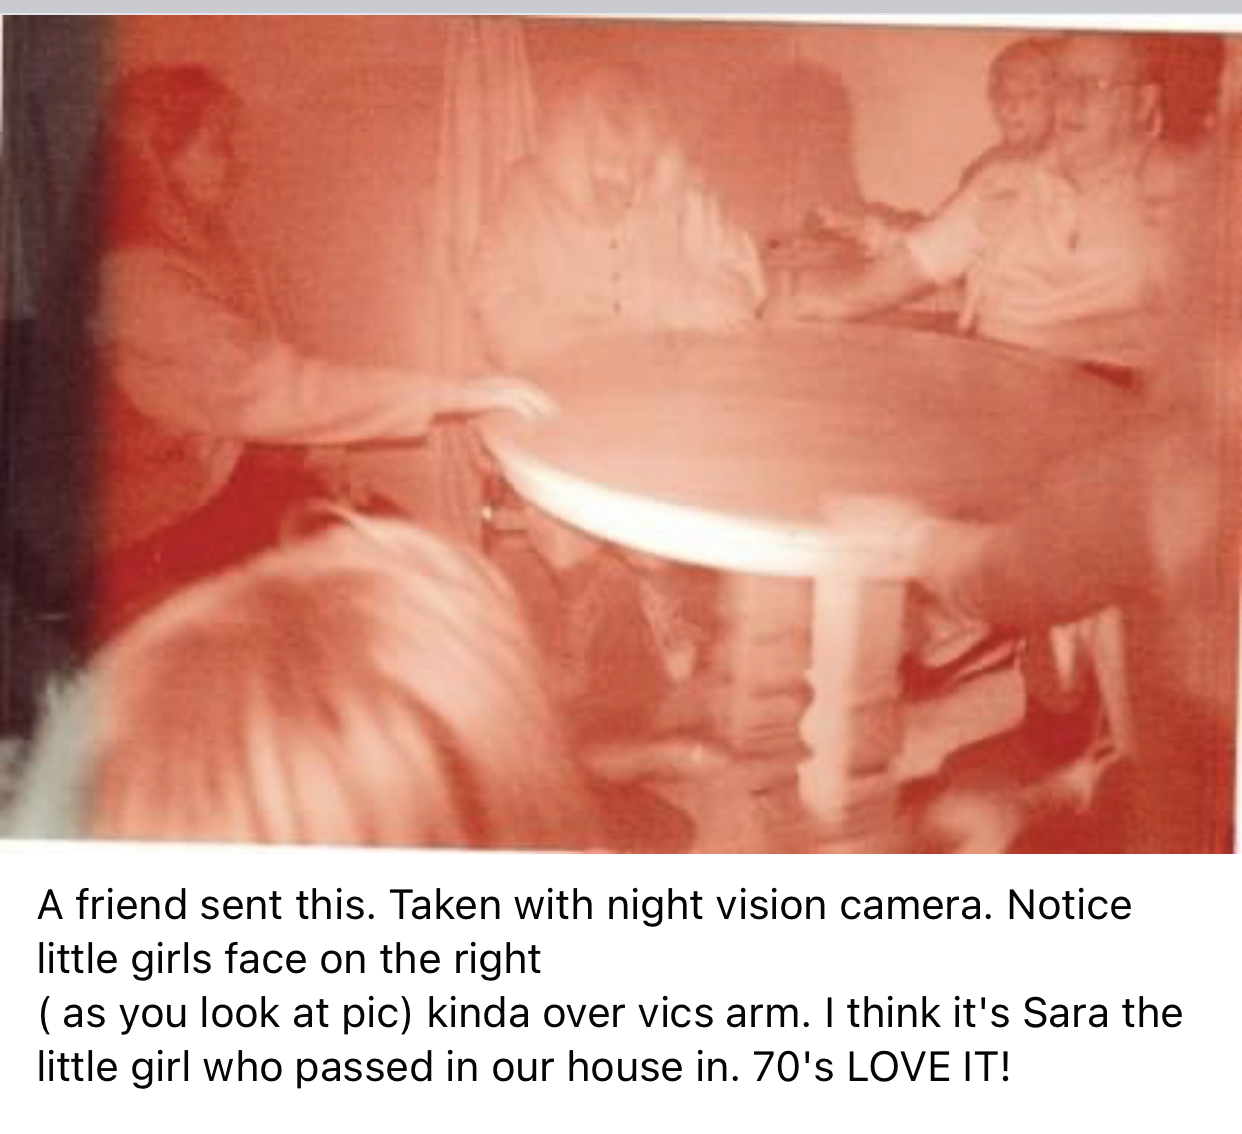 We were sure this was a picture of our little girl Sarah who passed at the Cassadaga cottage in the ‘70s. Several of the mediums knew the family. Sarah’s grandma,  mom and Sarah lived there for many, many years.  She came to visit us often ♥️